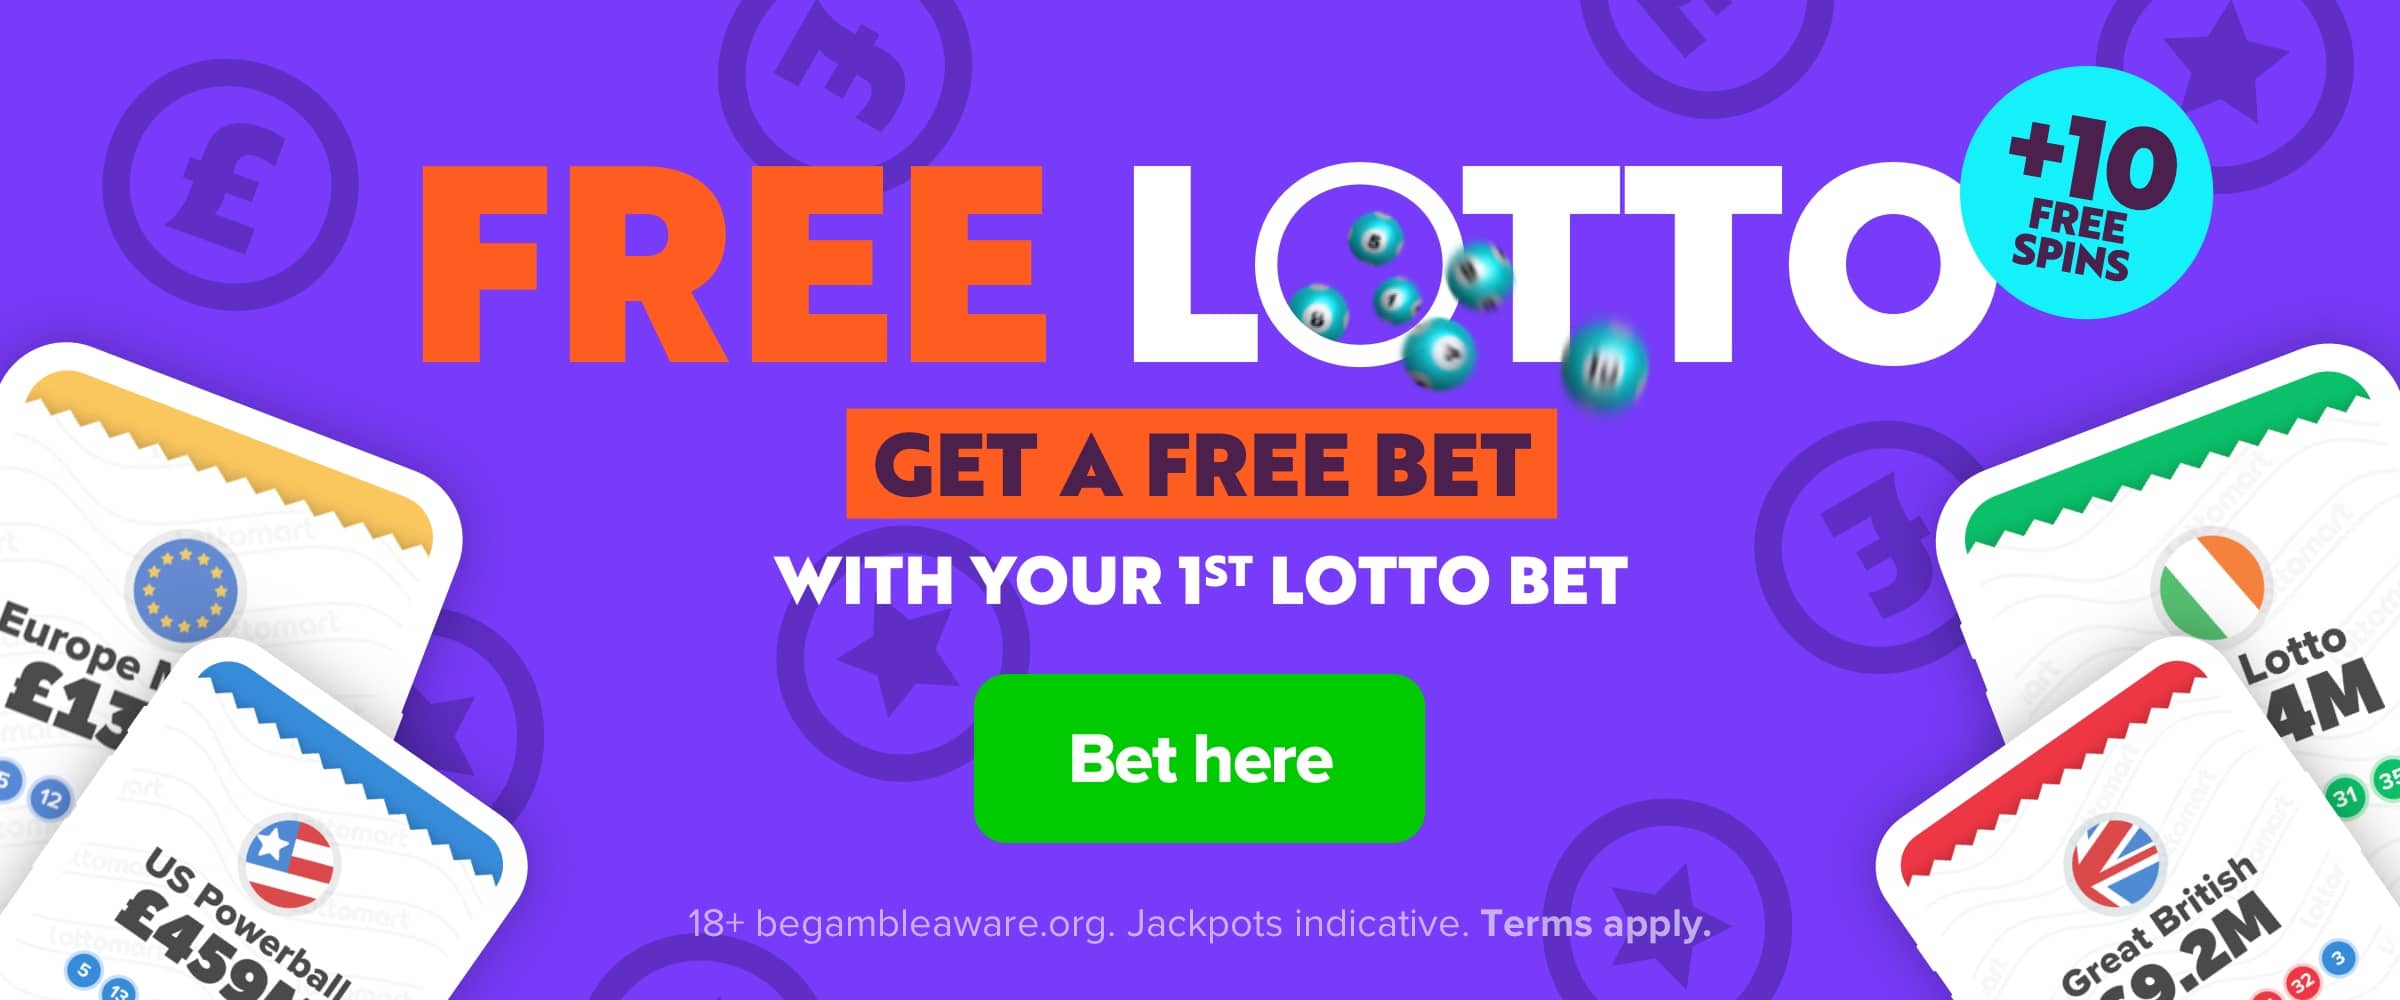 Free Lotto - Get a free bet with your first lotto bet.